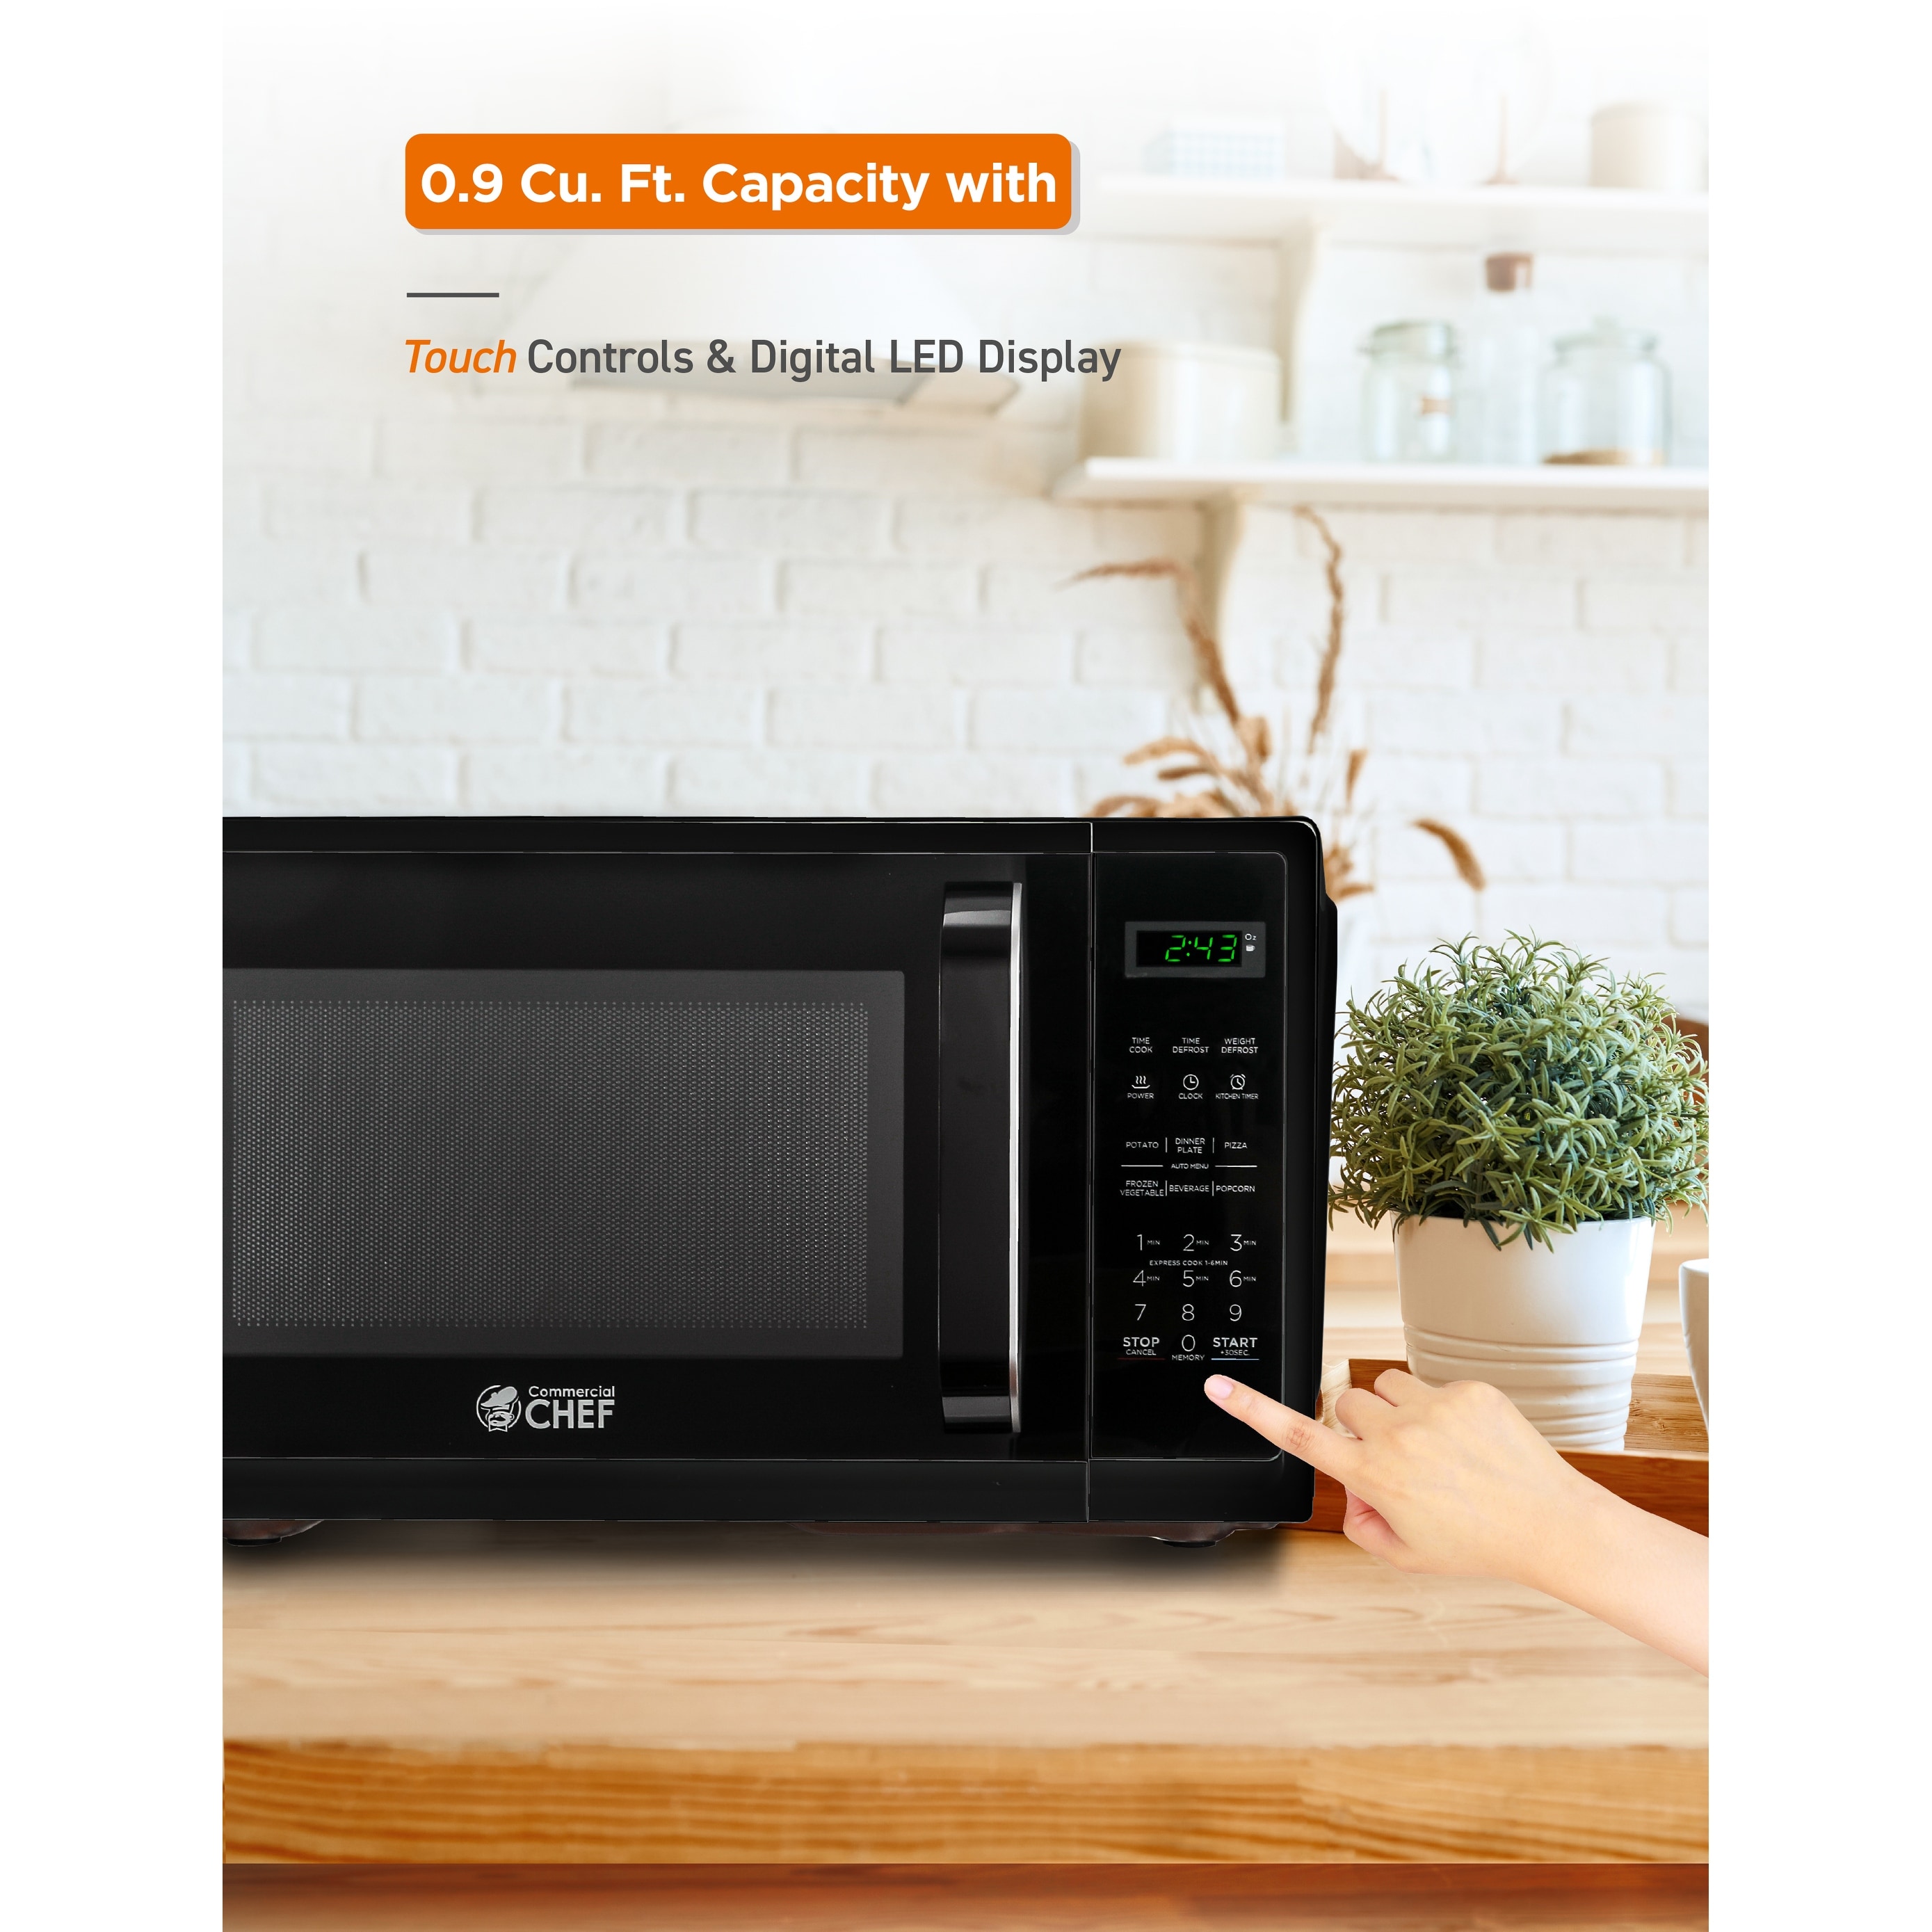 https://ak1.ostkcdn.com/images/products/is/images/direct/ad1d259a5d25c94f98c590a9a0c53ed7cfd3ee1a/0.9-Cu.Ft-Countertop-Microwave-Oven-Black.jpg